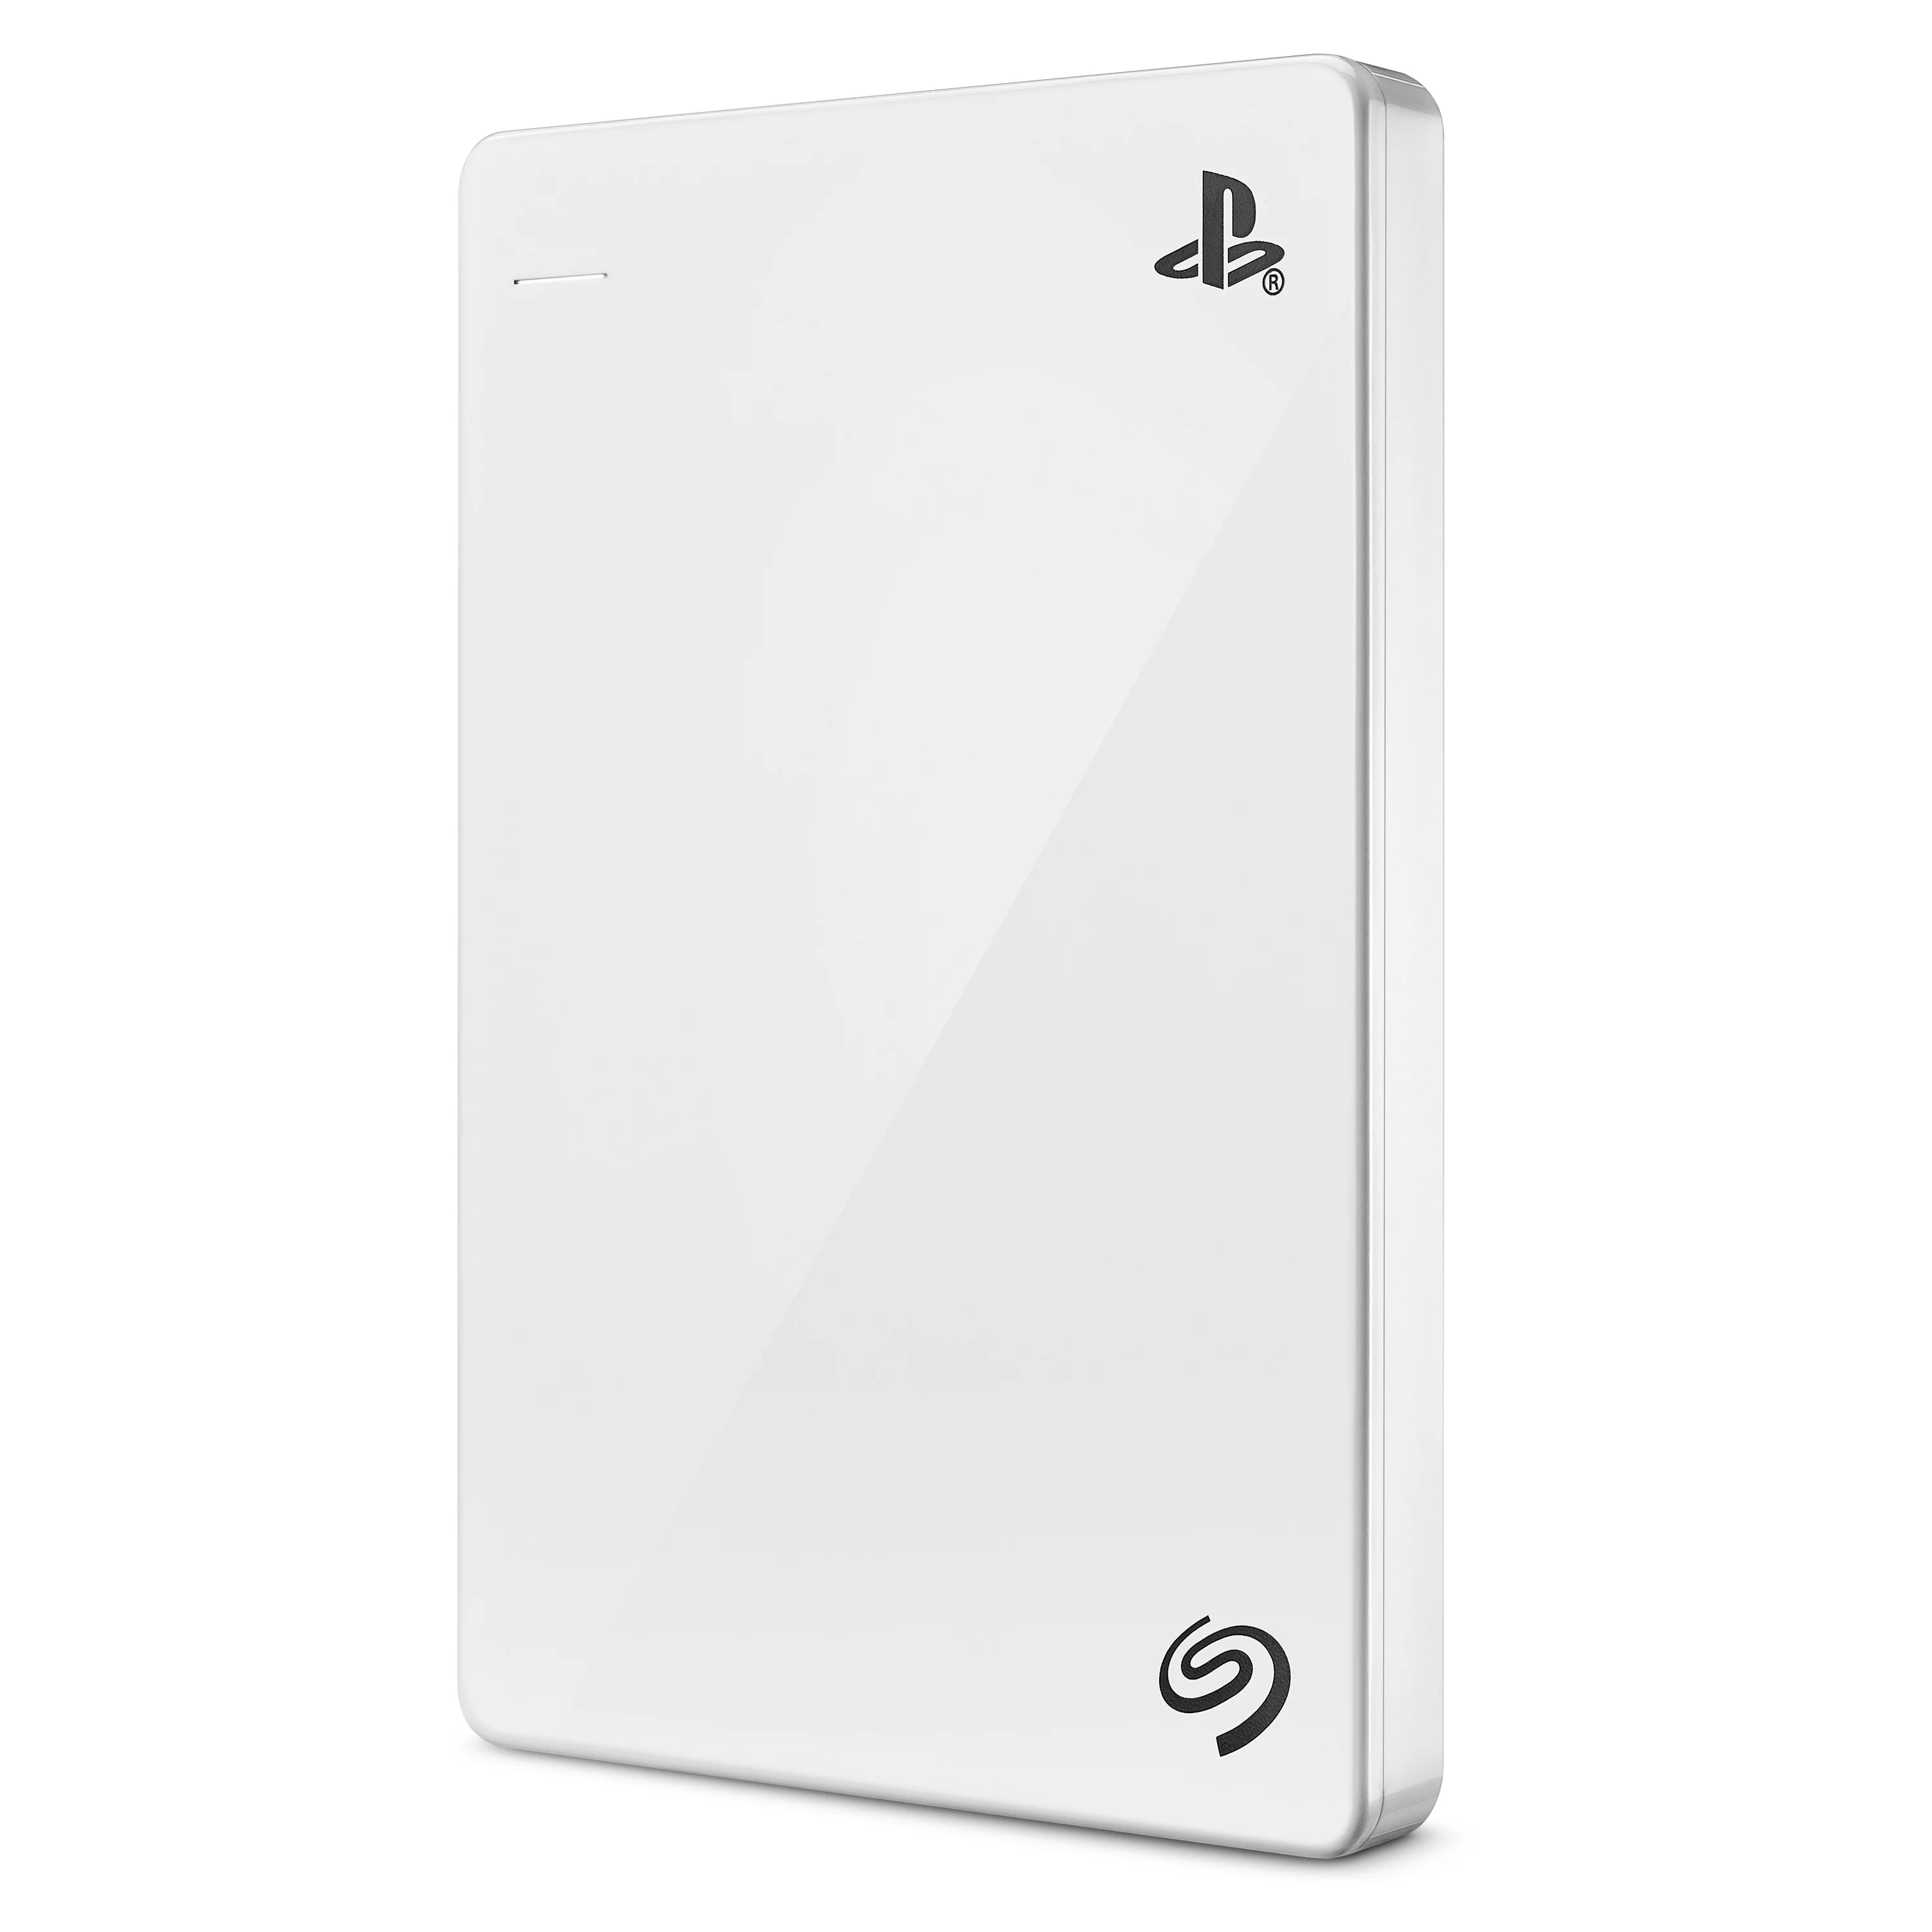 Seagate 2TB Game Drive for PlayStation 4 PS4 Portable External Hard Drive USB 3.0 (White) Officially Licensed